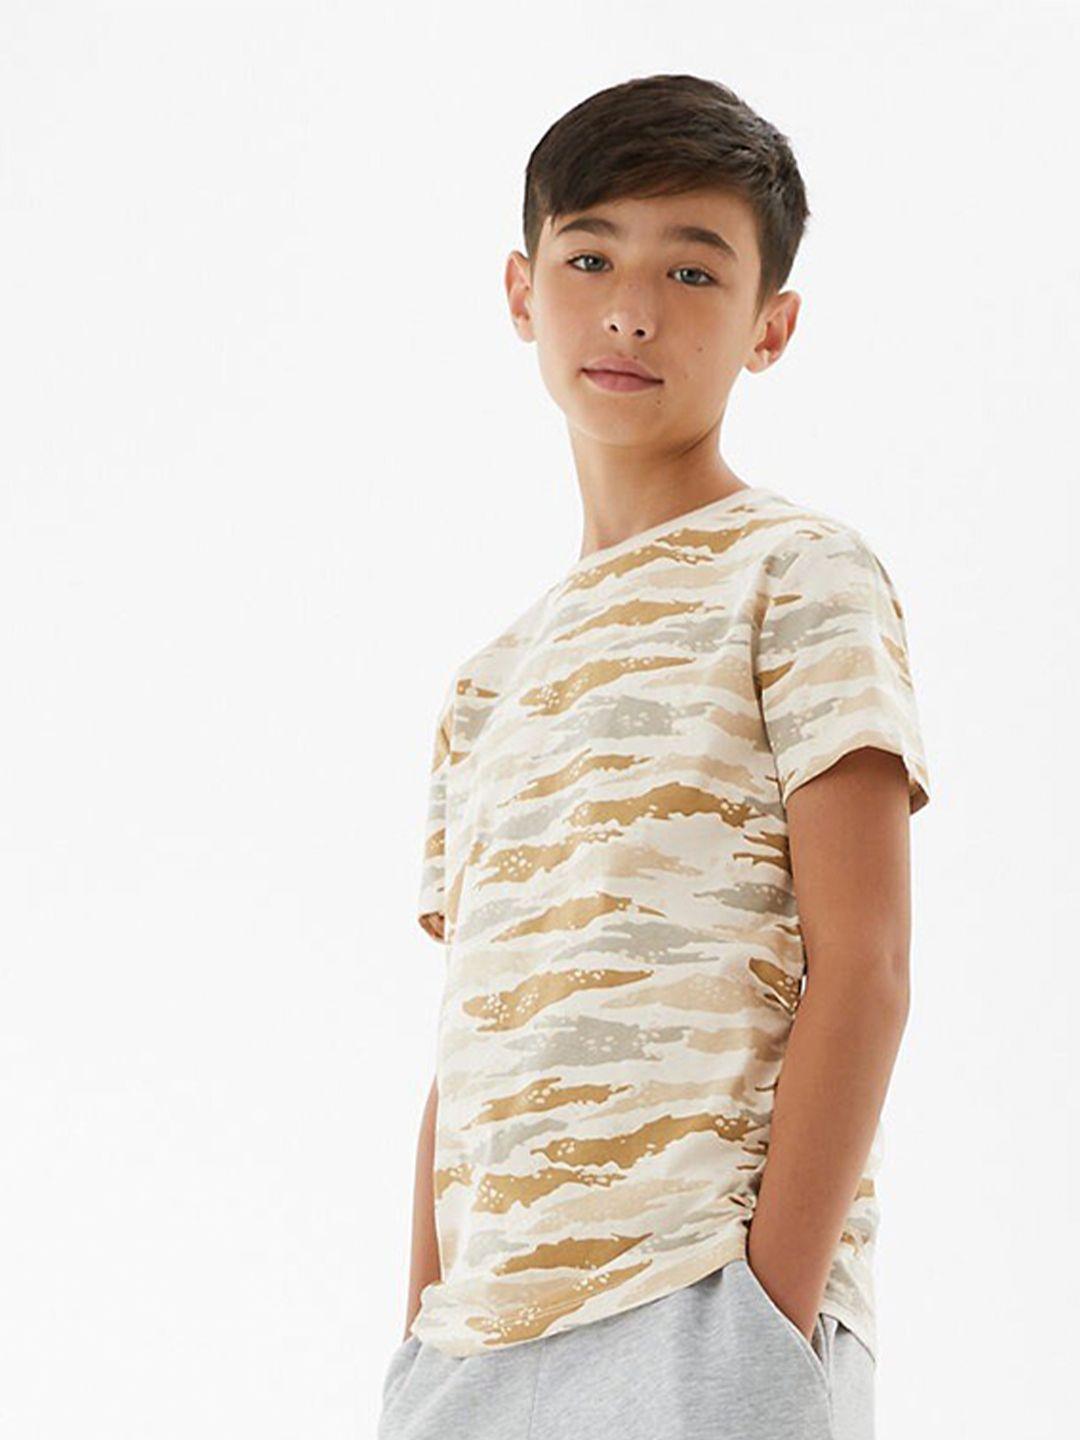 marks & spencer boys beige & grey abstract printed cotton t-shirt